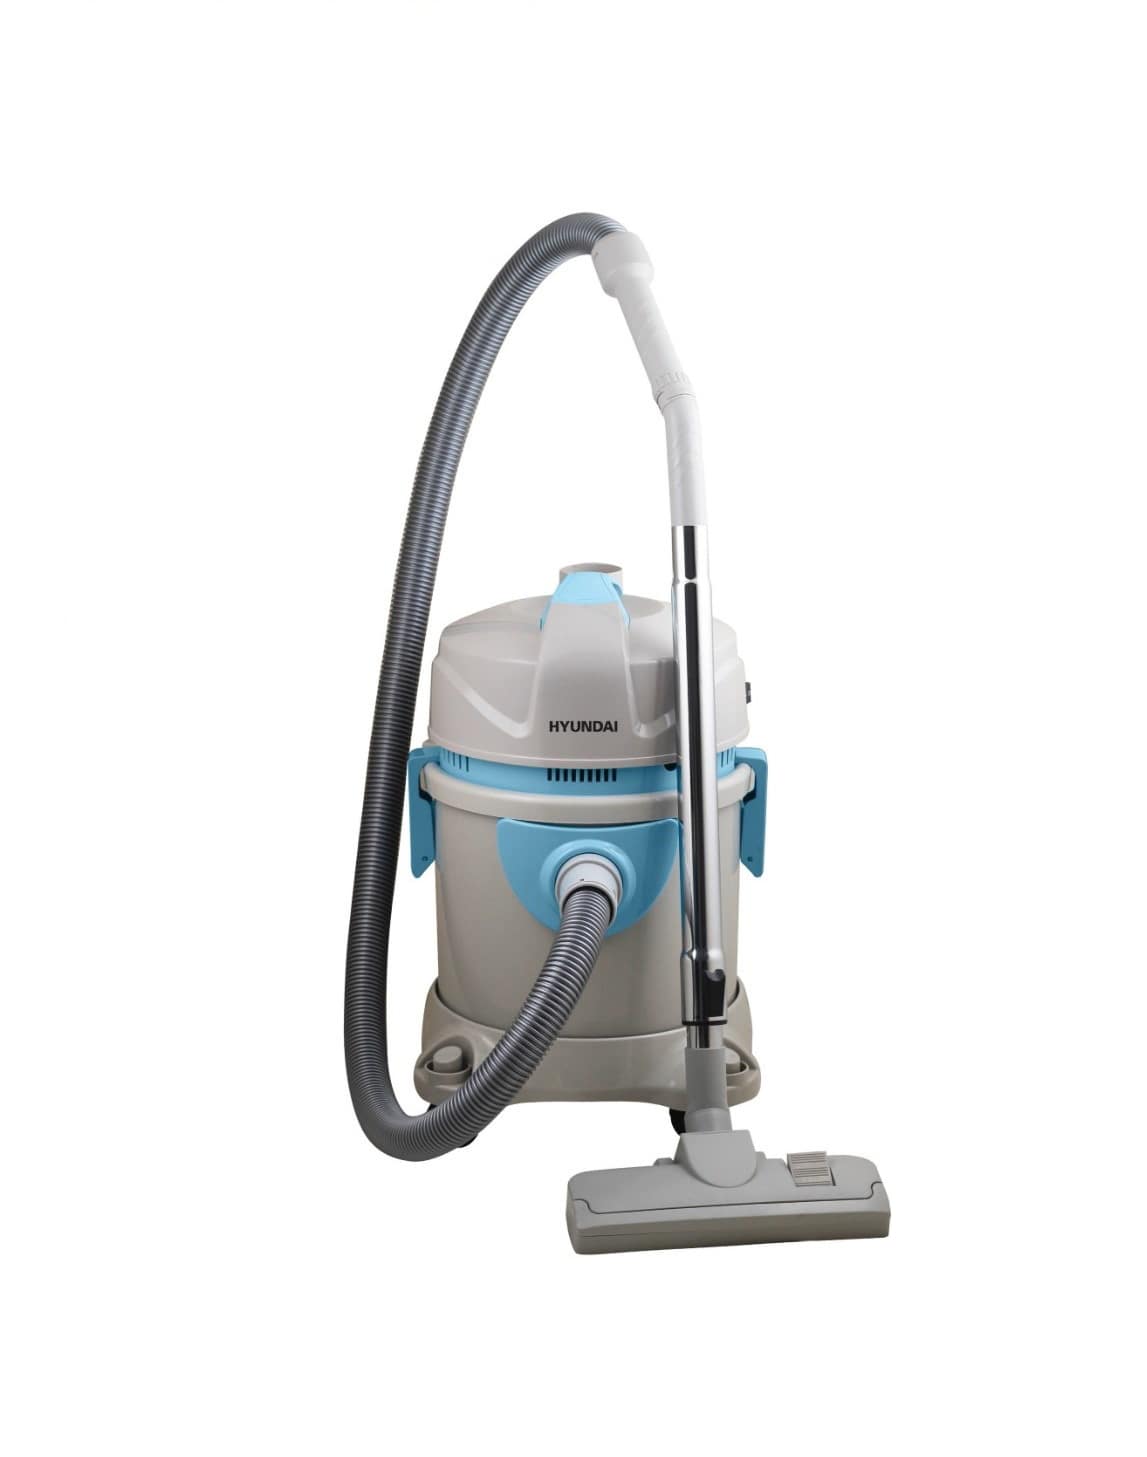 HYUNDAI Vacuum Cleaner With Suction Power 1200-1450w